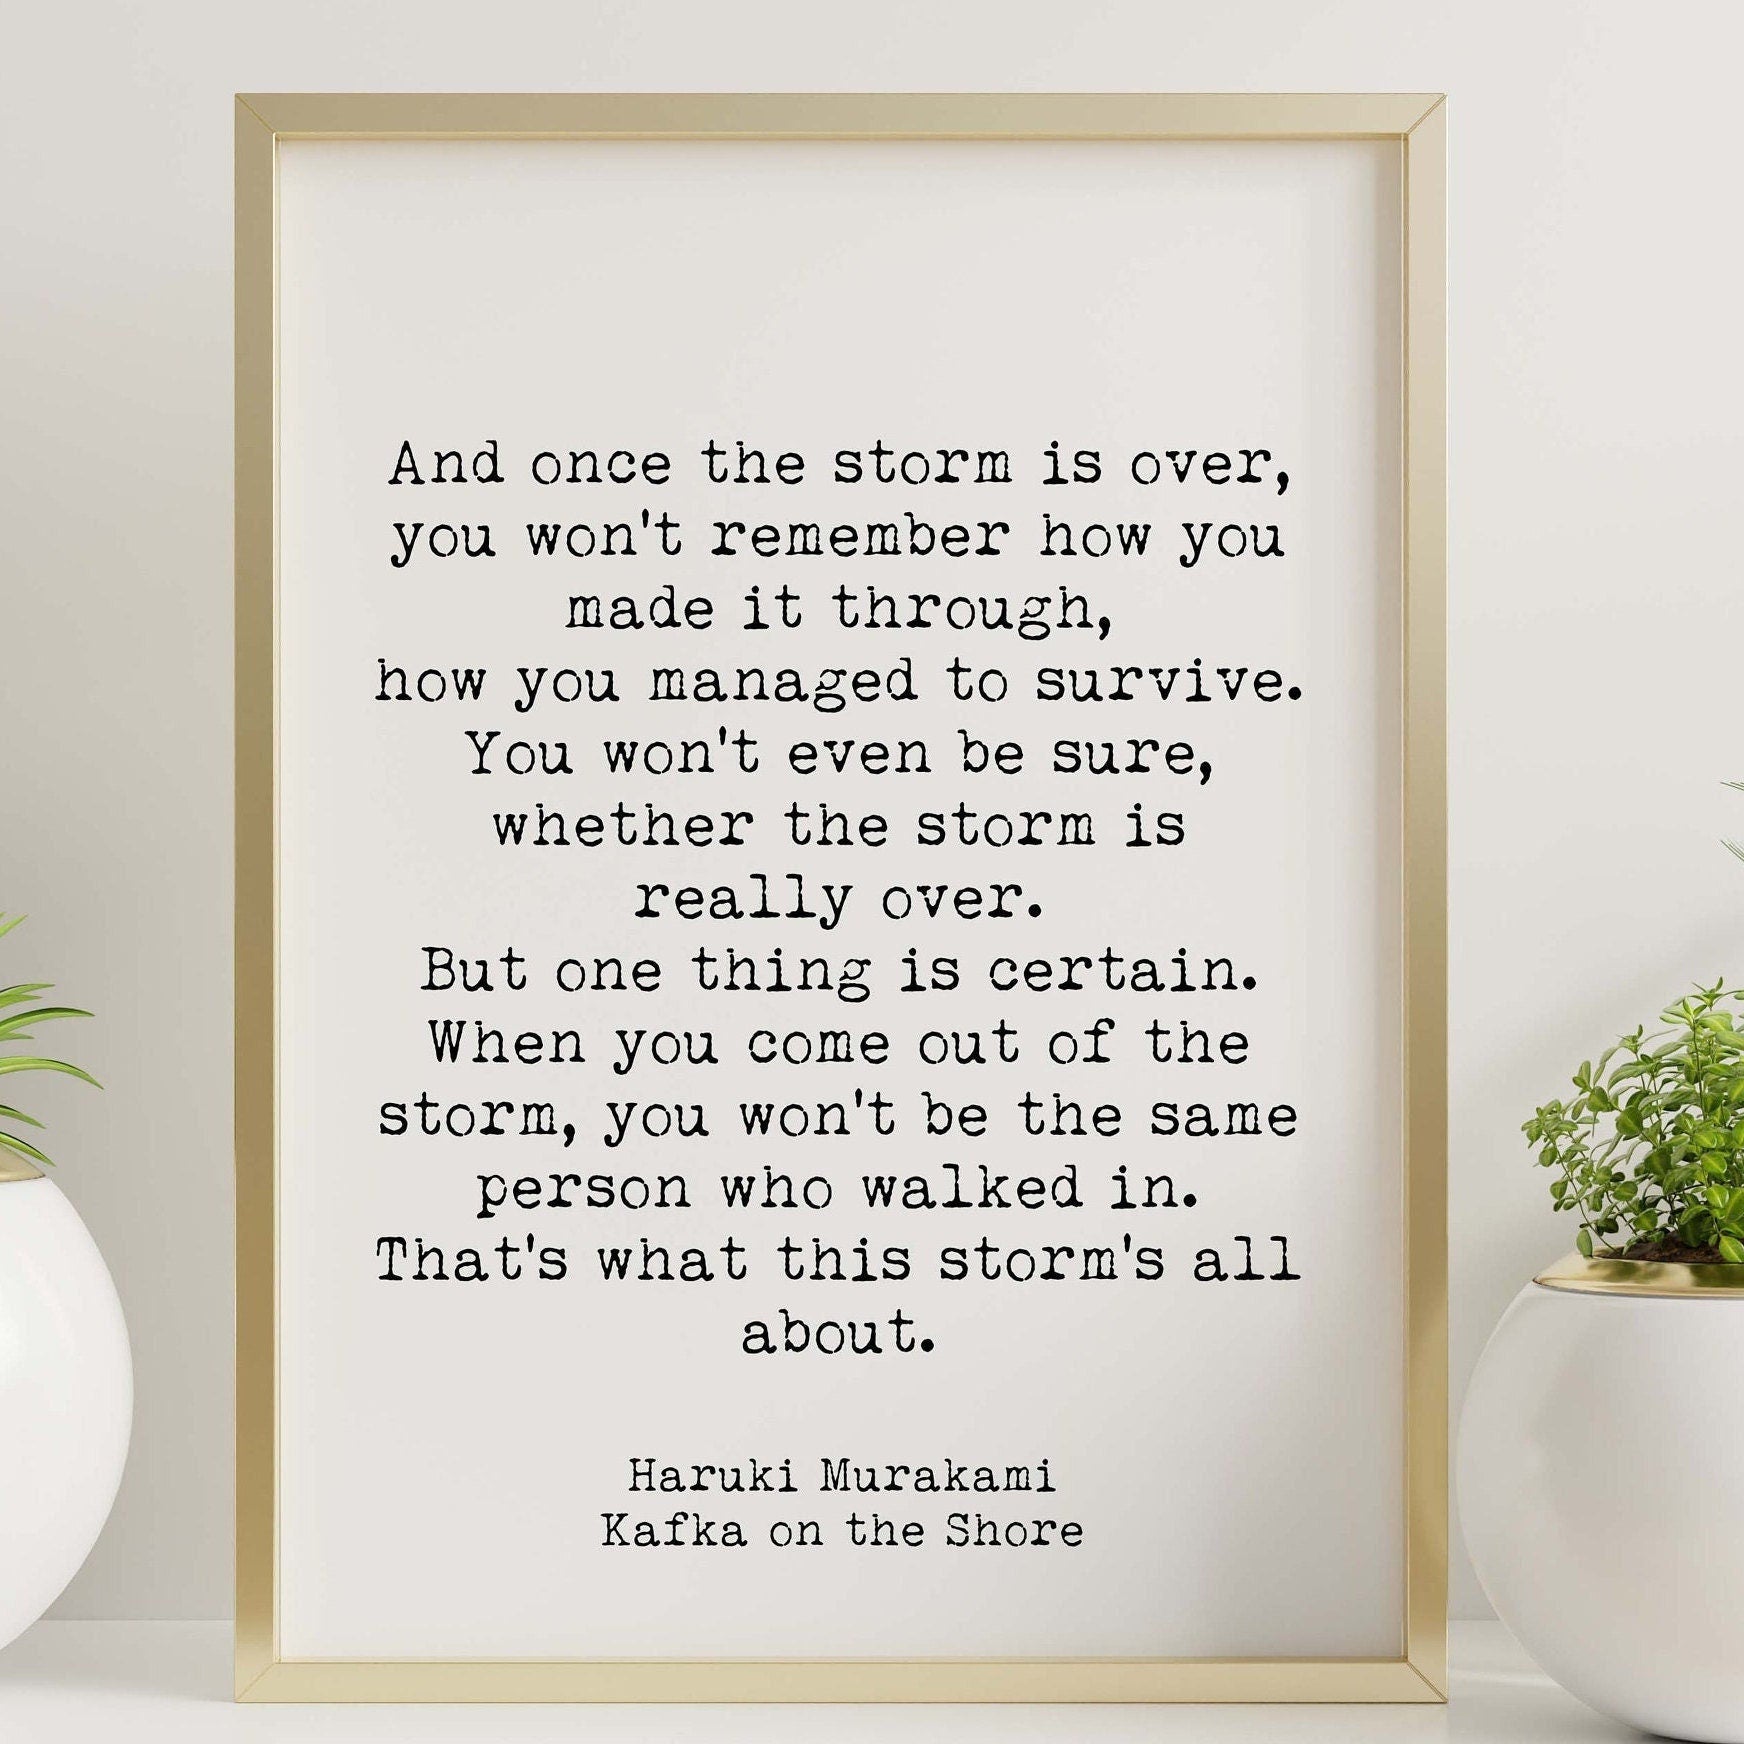 Once The Storm Is Over Haruki Murakami Quote Print in Black & White, Inspirational Quote Wall Art Prints Framed or Unframed